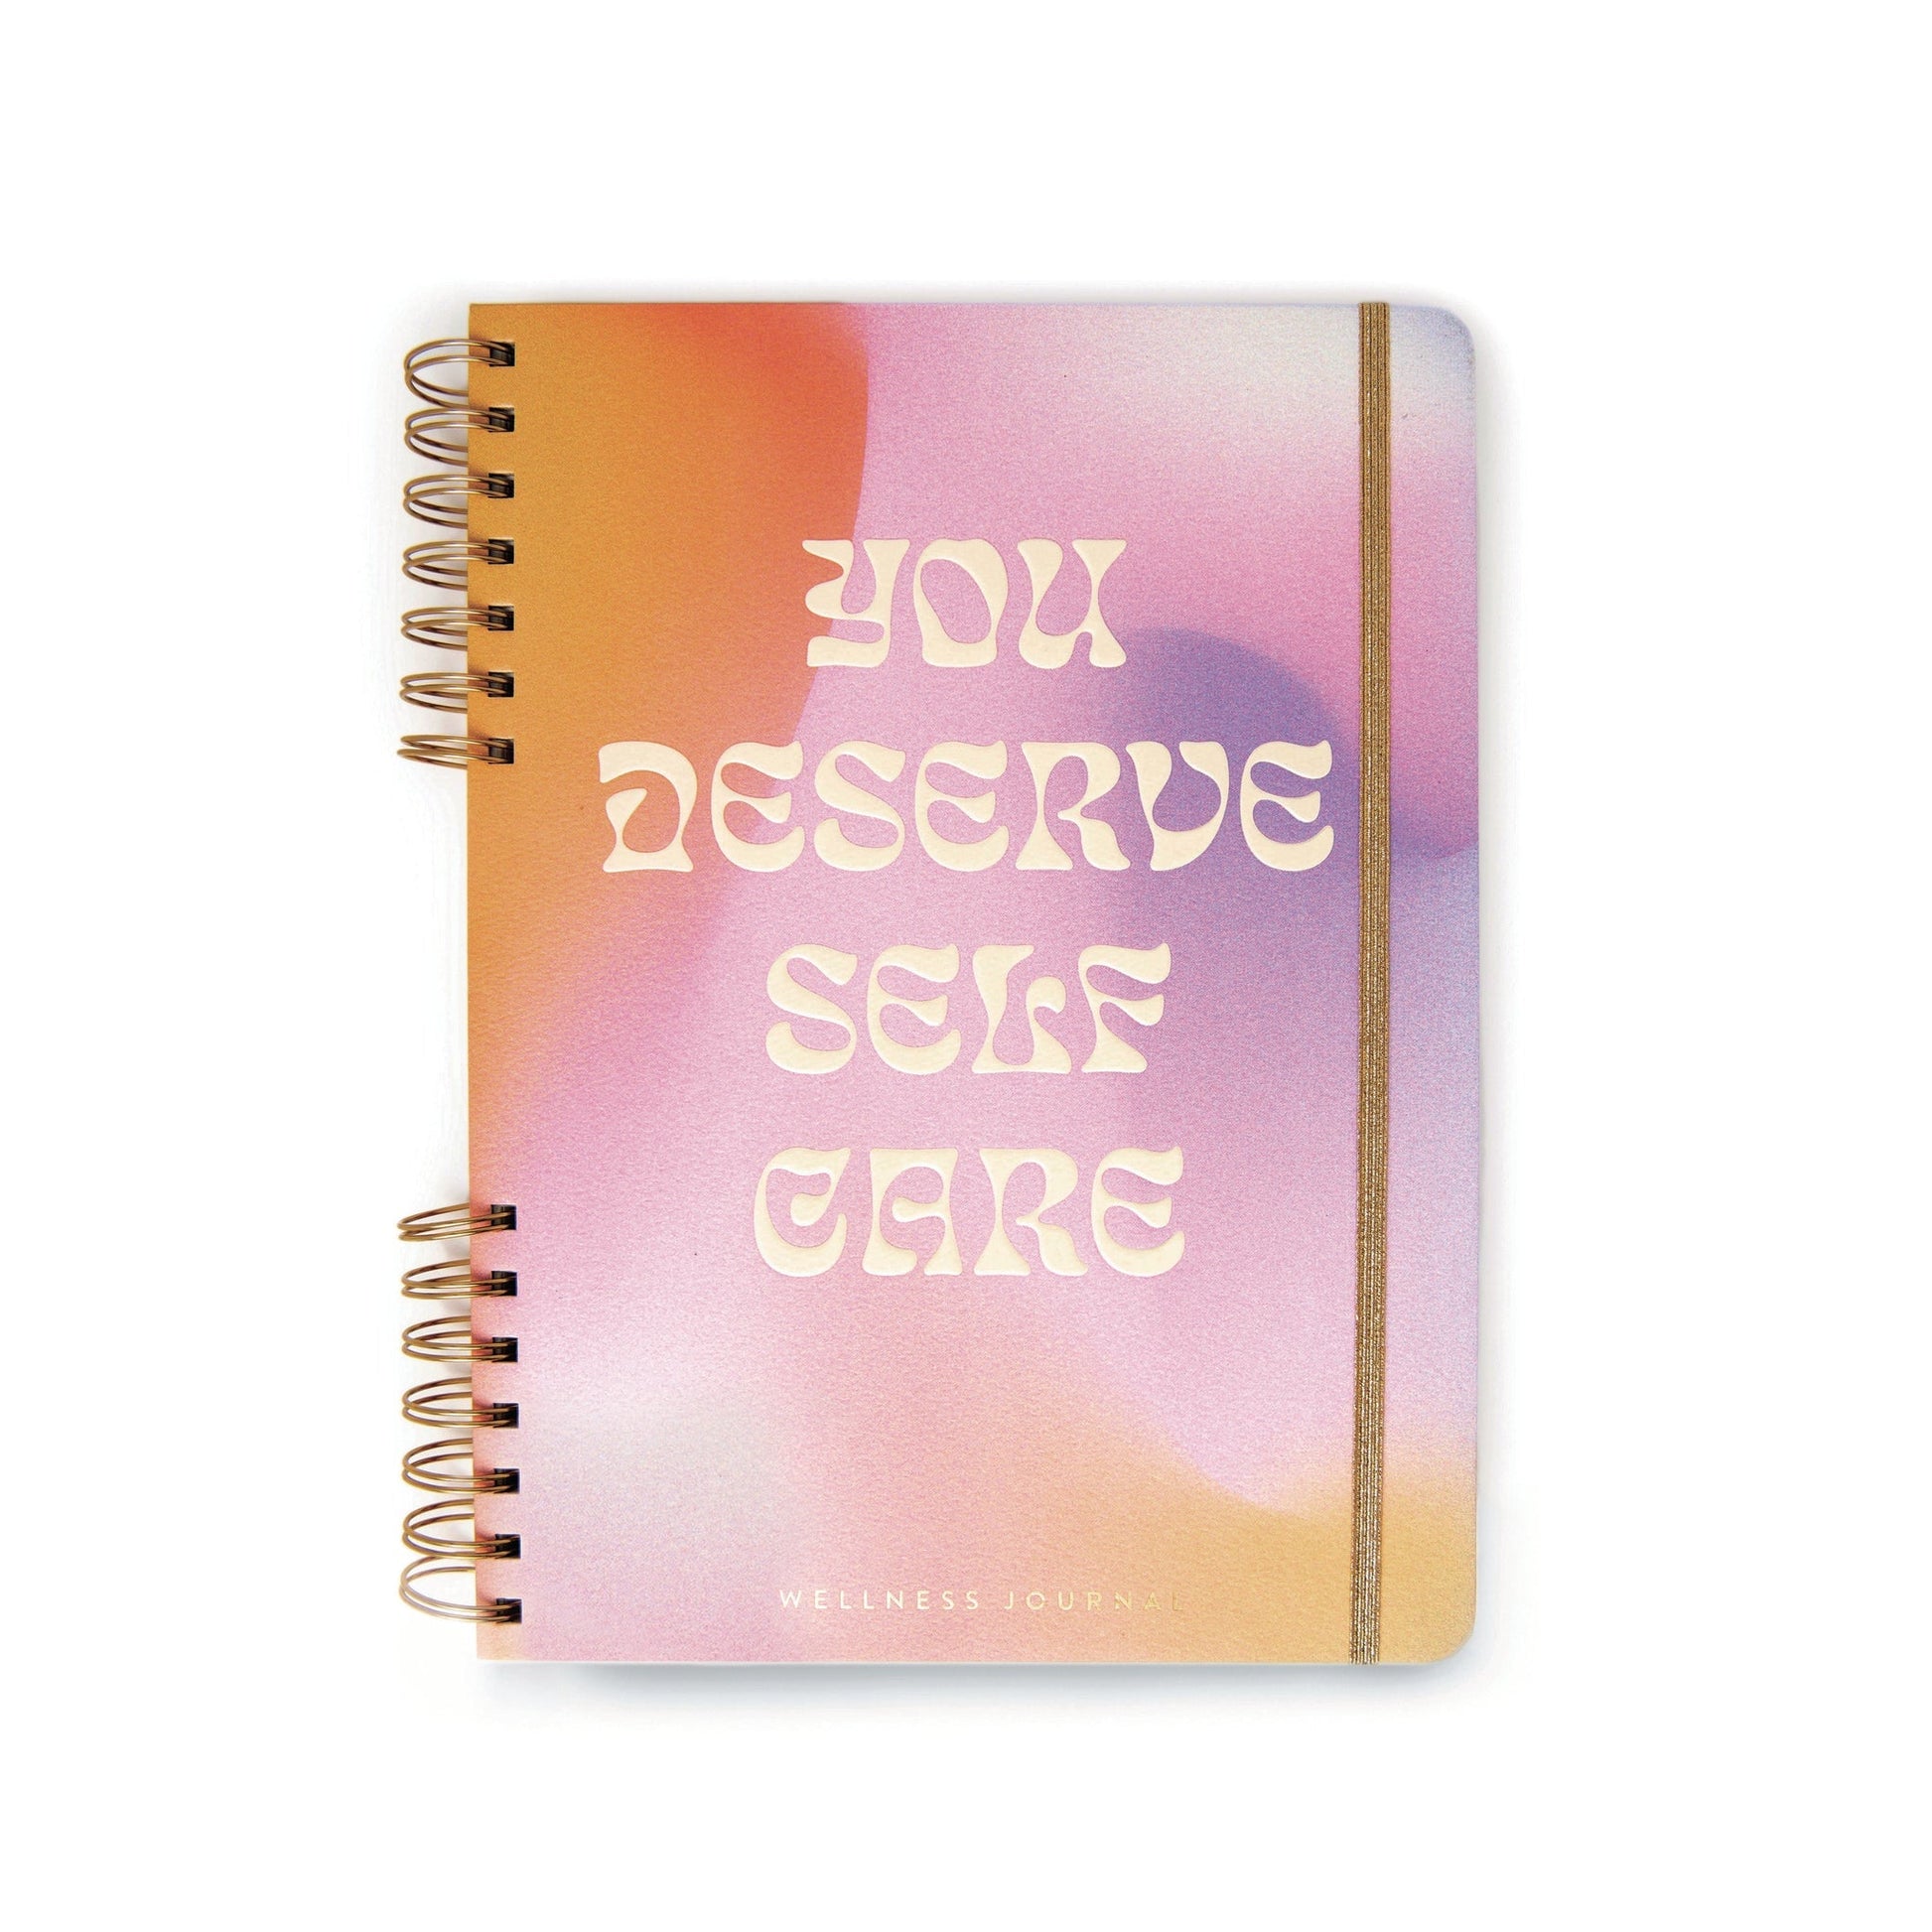 Guided wellness journal with metal coil binding, multicolored cover, and embossed text reading You Deserve Self Care